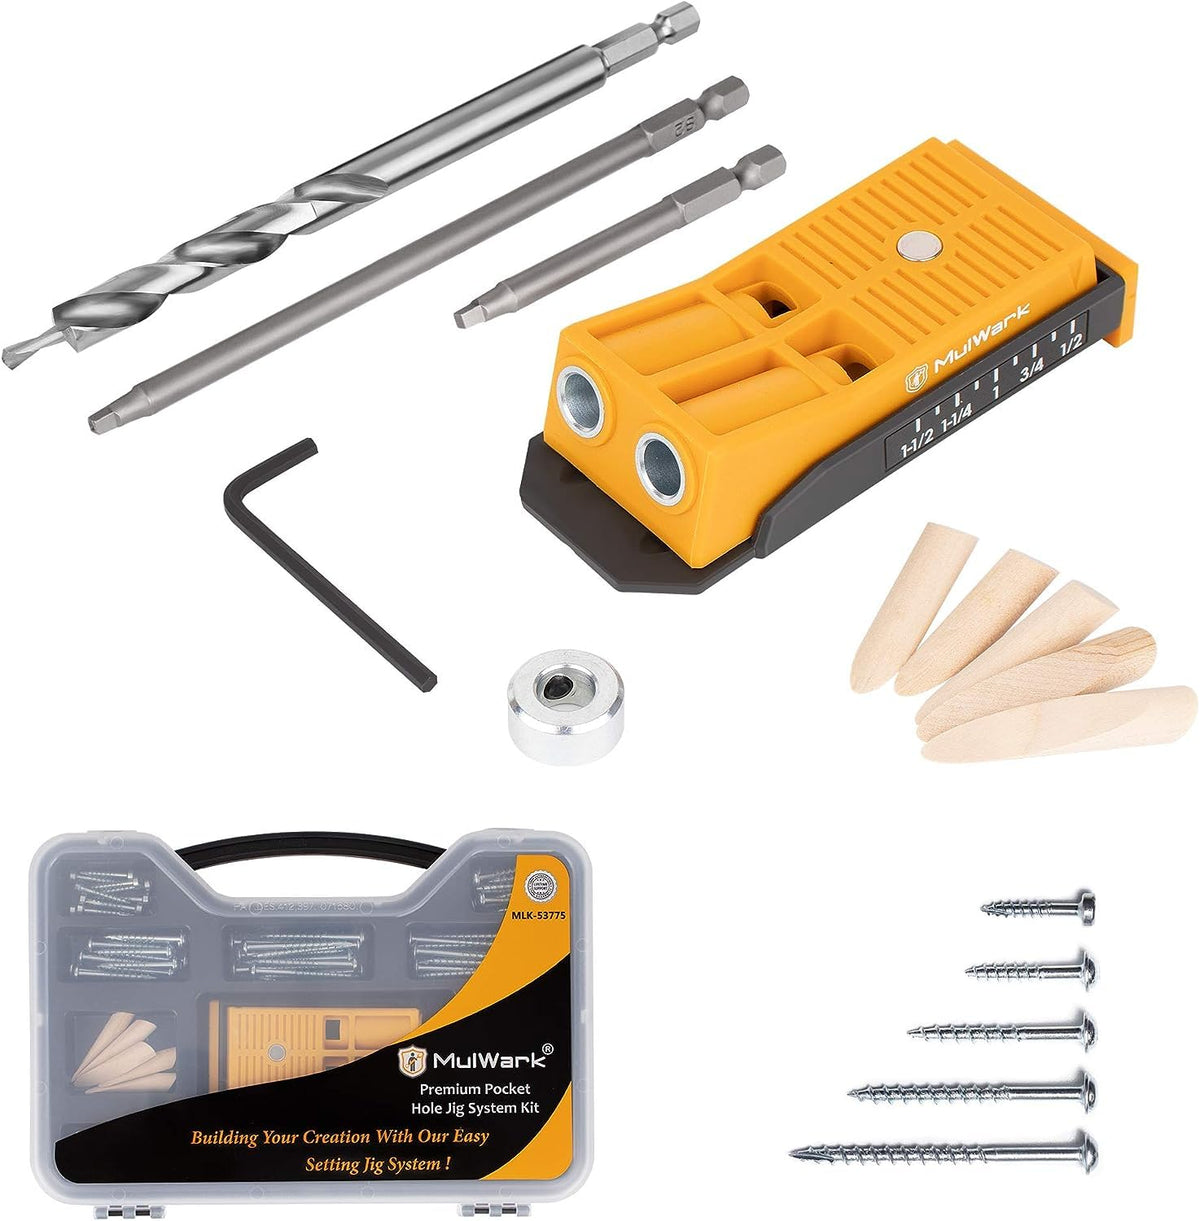 MulWark Mini Wood Pocket Hole Jig Kit - Two Pocket Screw Jig Kit with Drill Guide, Square Driver Bit, Hex Wrench, Step Drill Bit, Wooden Plugs and Screws - Mini Pocket Jig Hole Kit for Joinery Work